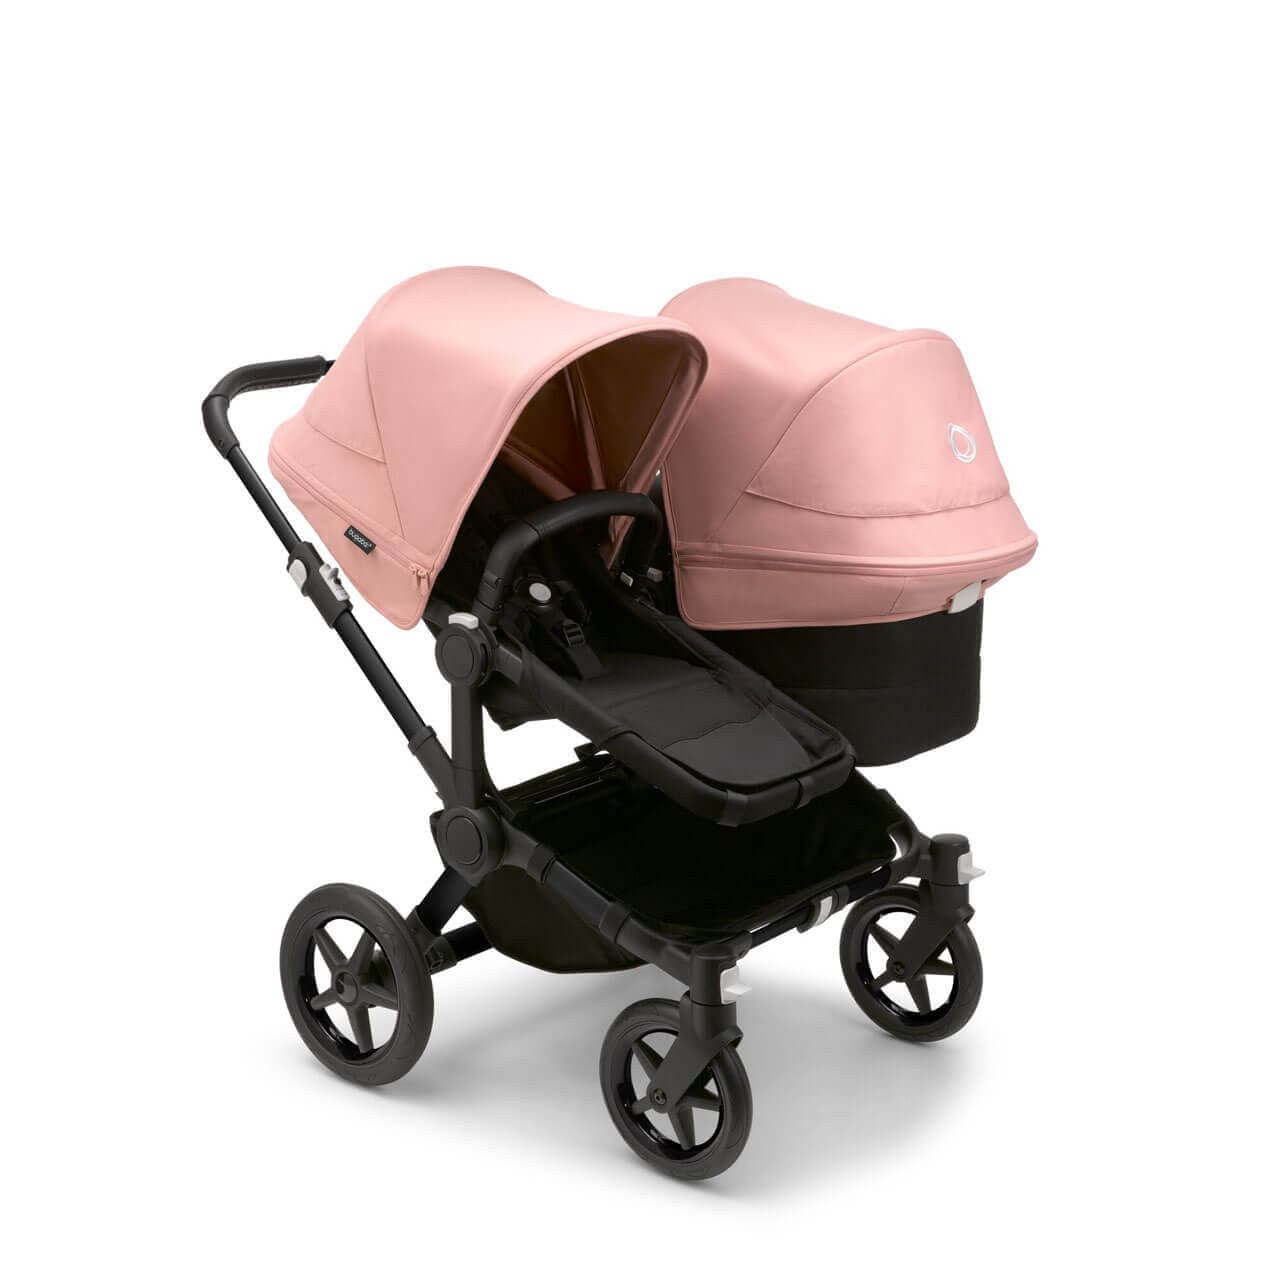 Bugaboo Donkey 5 Duo Pushchair on Black/Black Chassis - Choose Your Colour - Morning Pink | For Your Little One